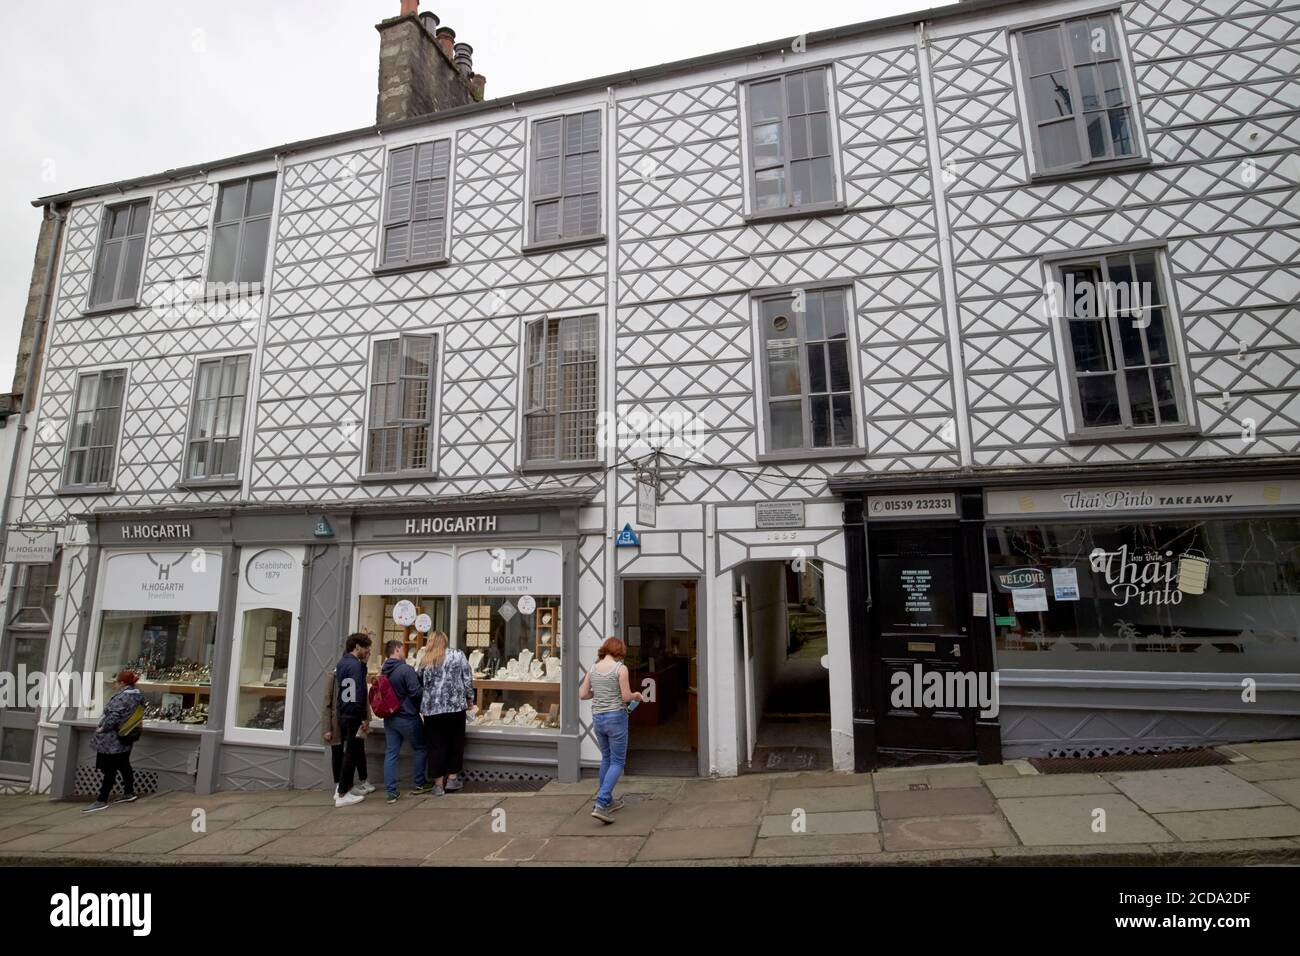 39-45 branthwaite brow buildings facade made from cast iron plates Kendal cumbria england uk Stock Photo